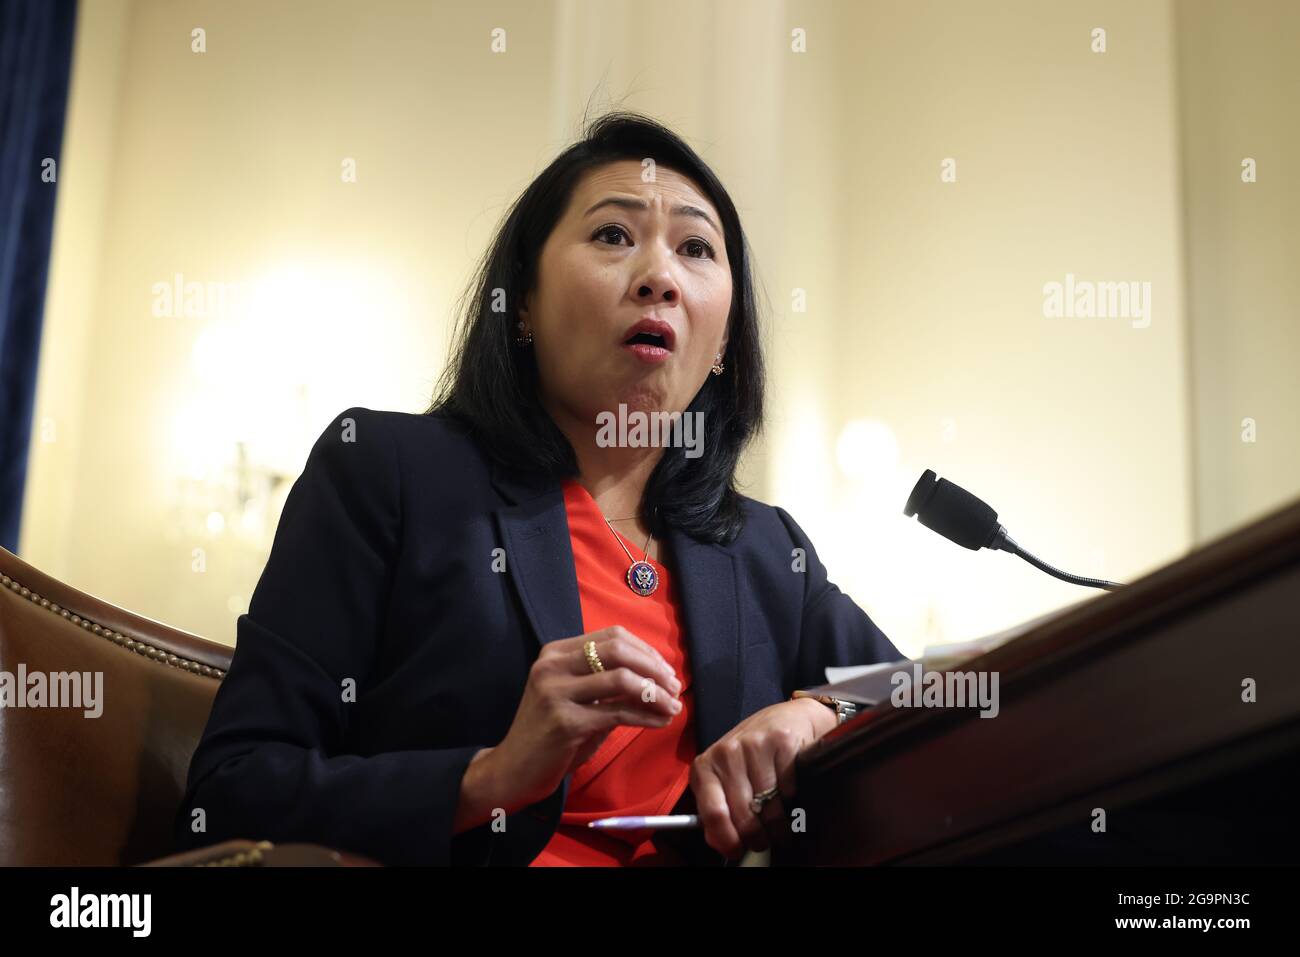 Democratic Representative from Florida Stephanie Murphy reacts as she speaks during her questioning after officer testimony before members of the Select Committee to Investigate the January 6th Attack on the US Capitol, including Chairman and Democratic Representative from Mississippi Bennie Thompson, during their first hearing in the Cannon House Office Building on Capitol Hill in Washington, DC, USA, 27 July, 2021. The committee will hear testimony from members of the US Capitol Police and the Metropolitan Police Department who tried to protect the Capitol against insurrectionists on January Stock Photo